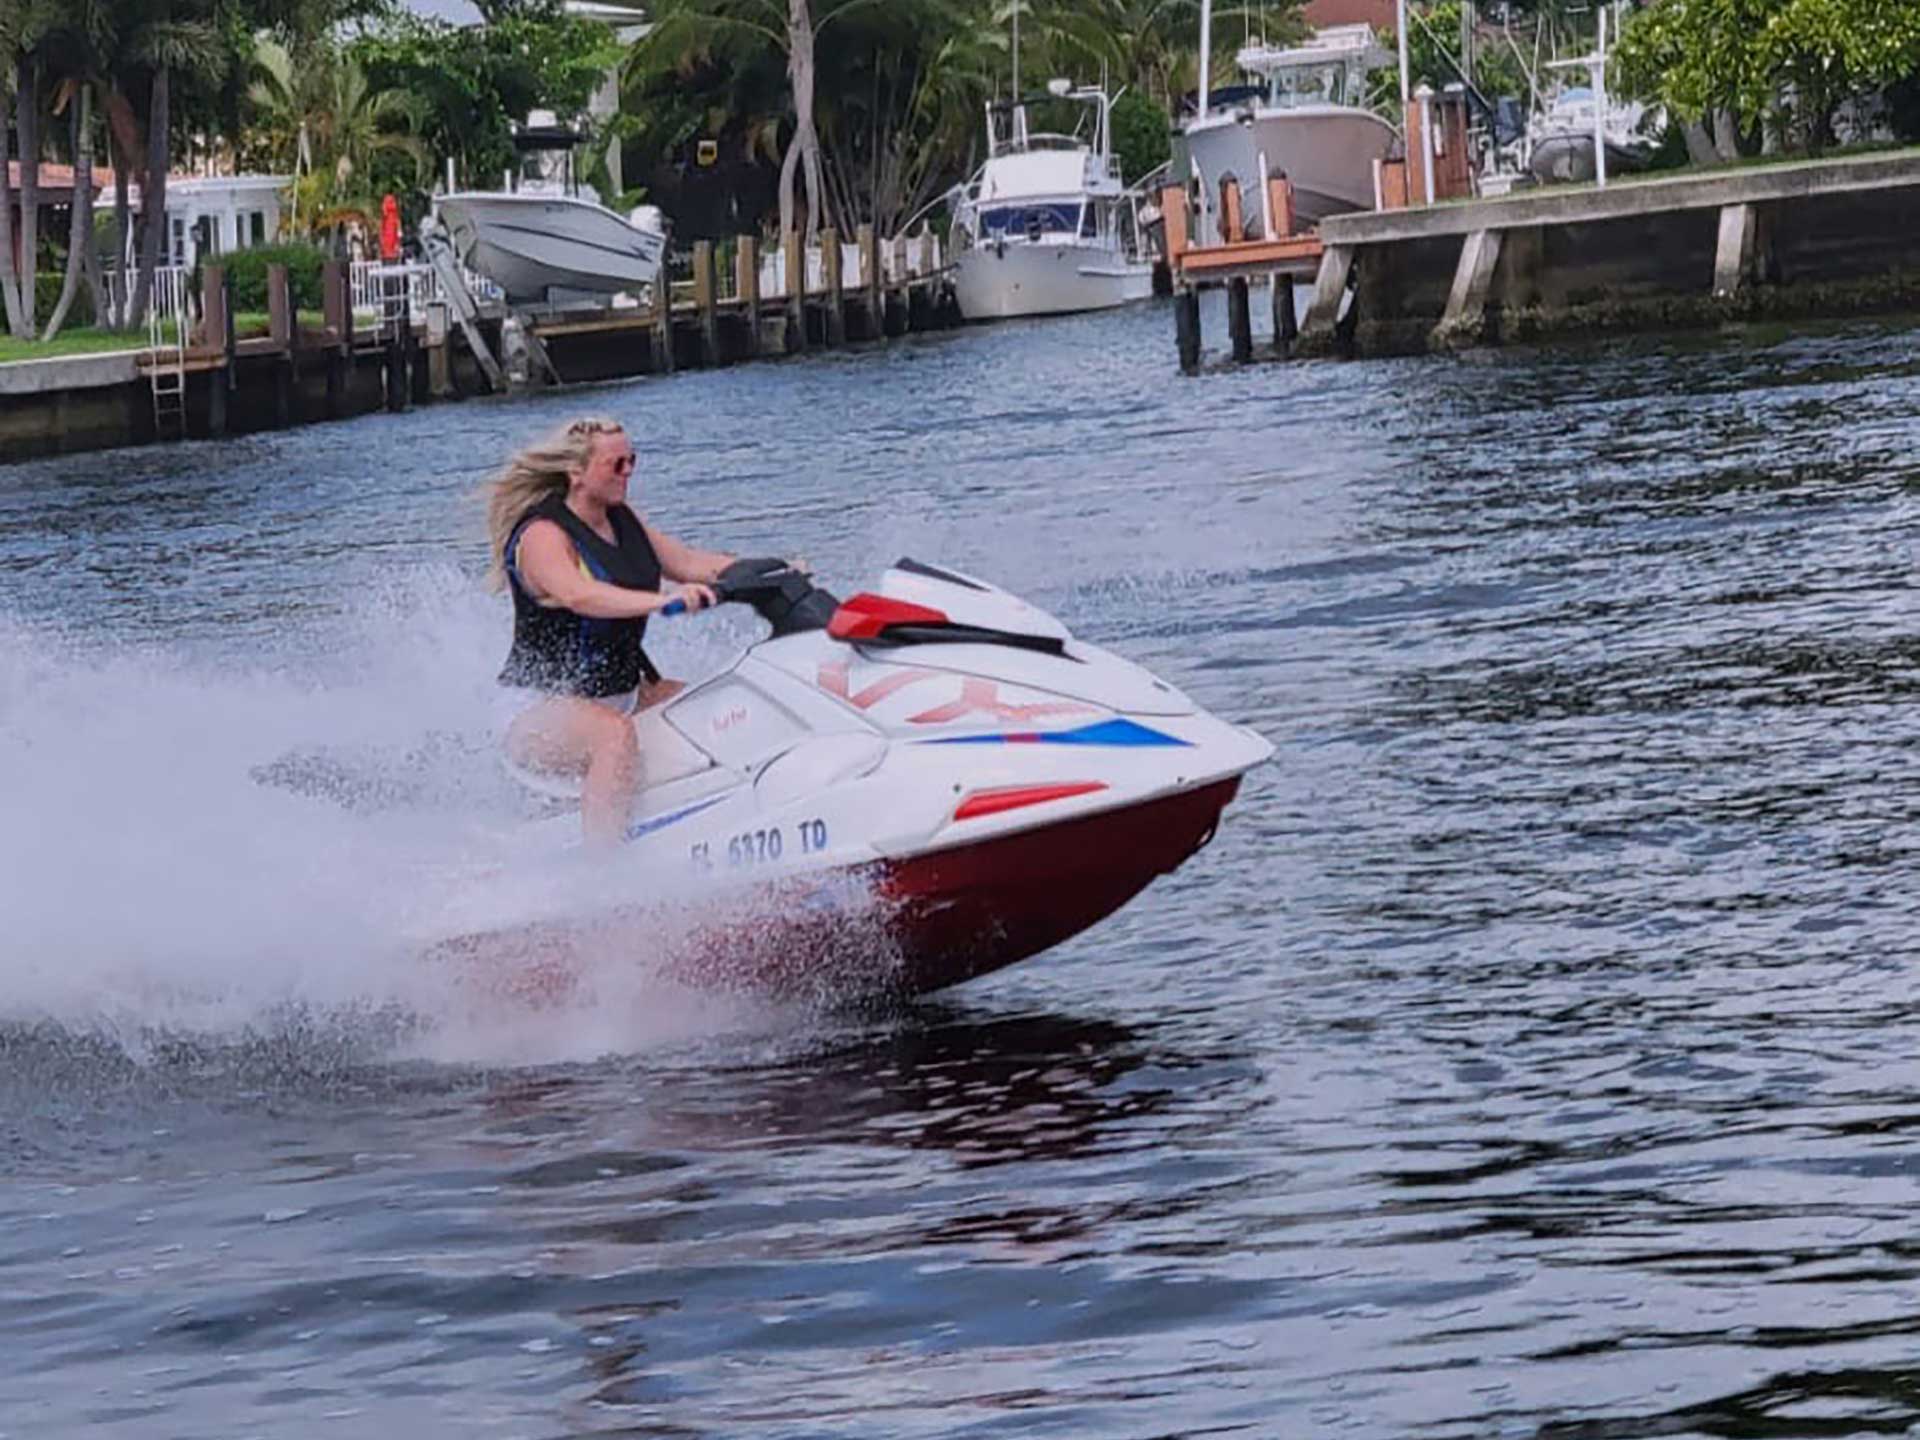 A woman riding a jet ski while passing homes